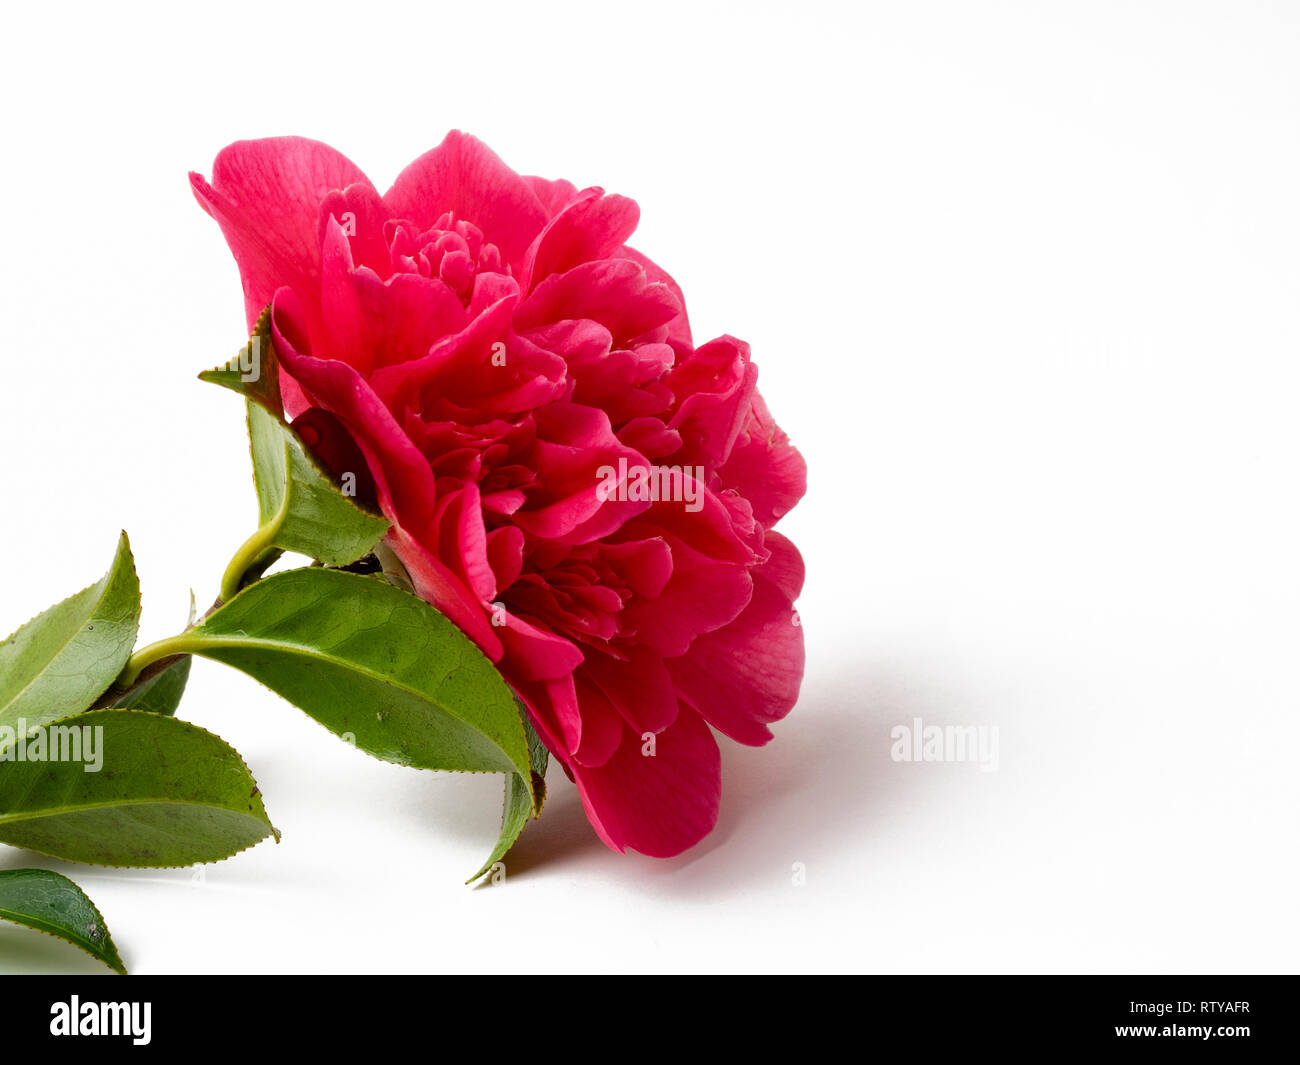 Single bloom of the peony centred Camellia x williamsii 'Anticipation' on a white background Stock Photo